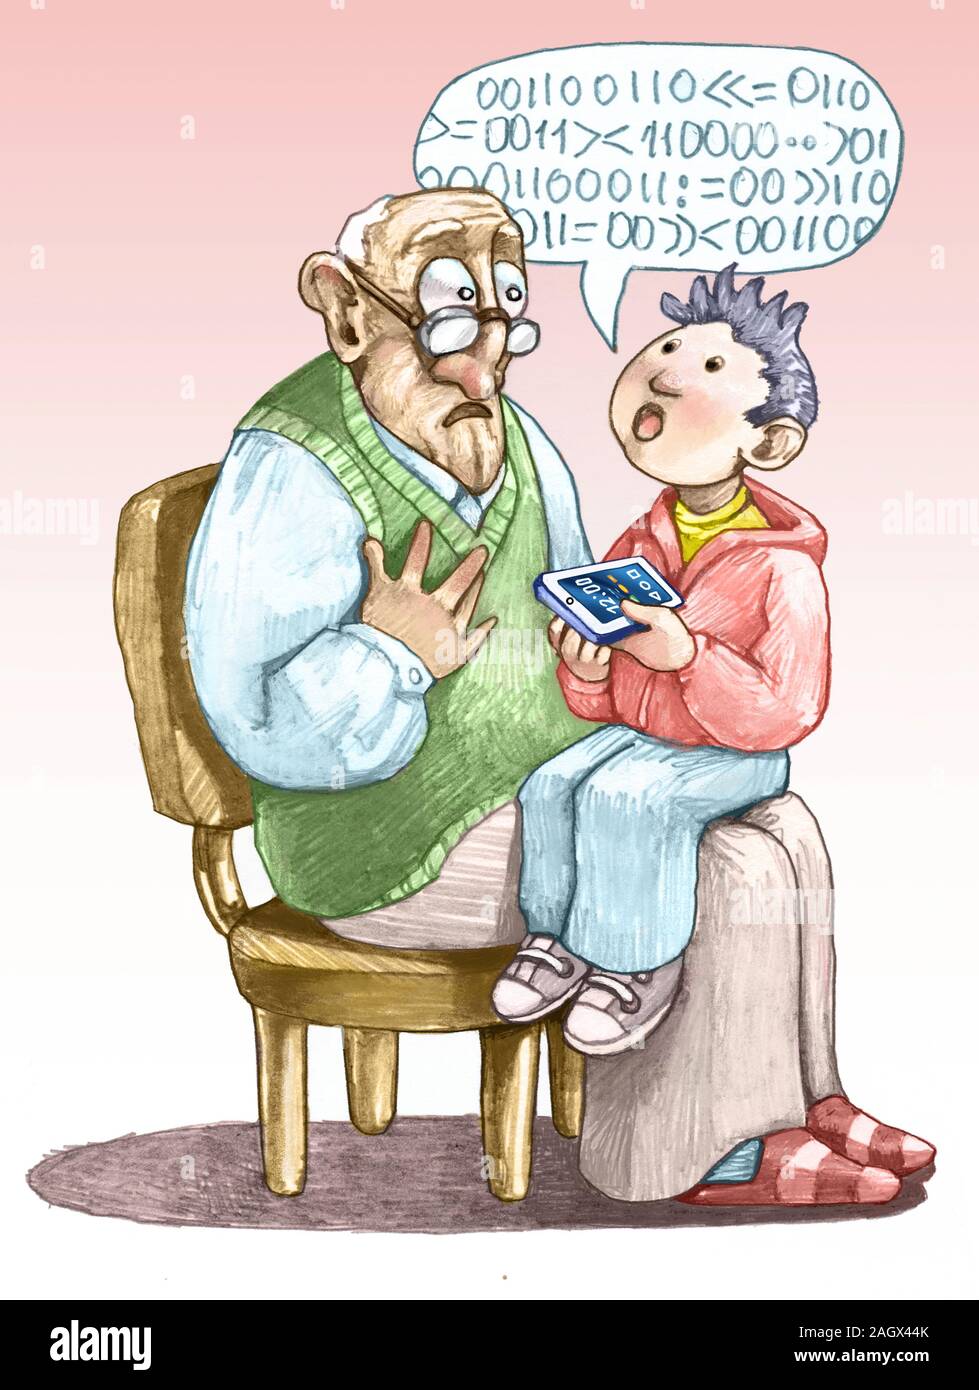 Grandpa with a shocked face holds on knees grandson who speaks a technological language holding smartphone humorous pencil draw Stock Photo